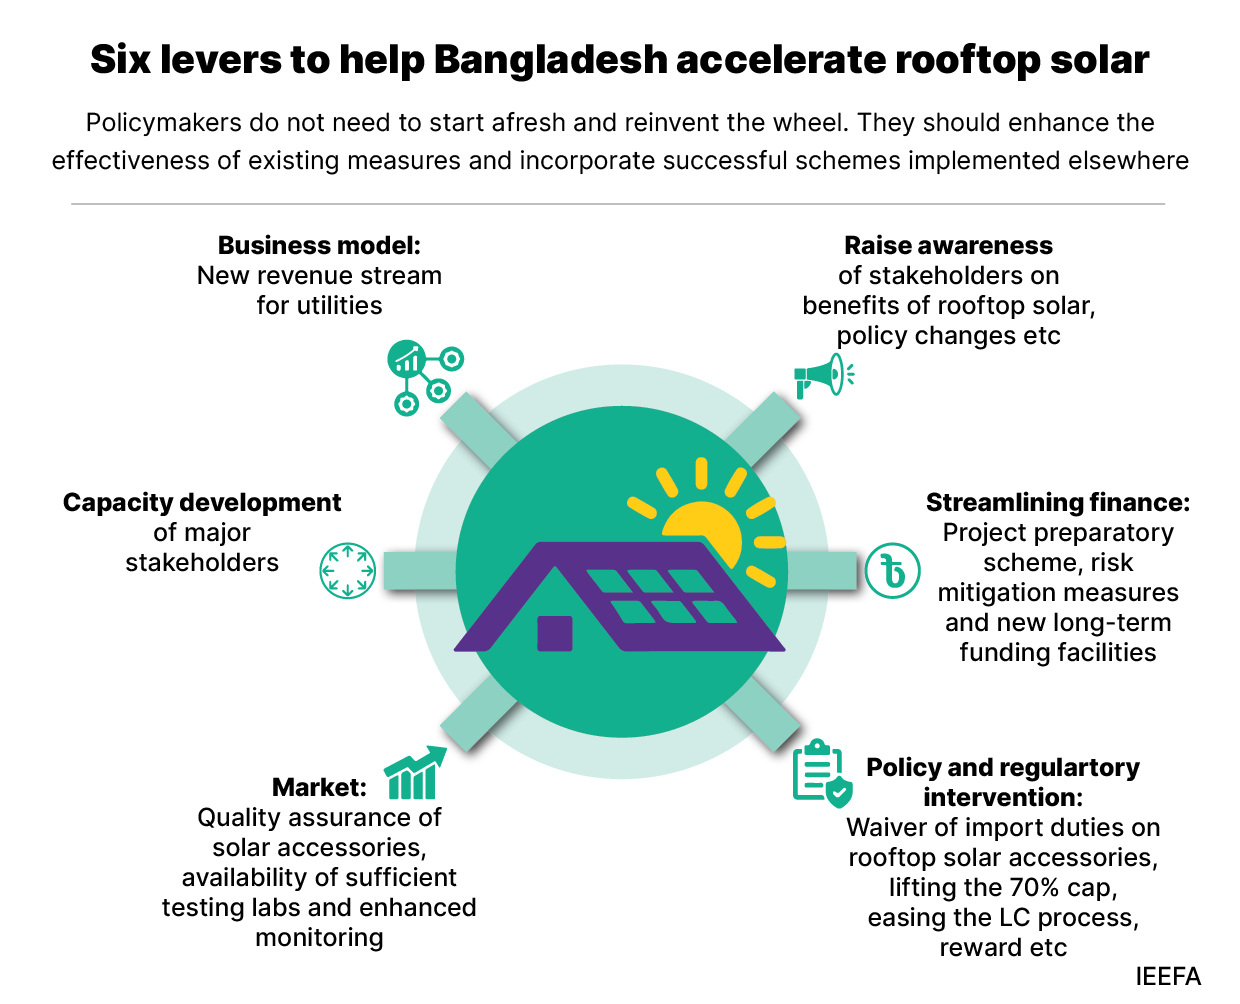 Six levers for rooftop solar in Bangladesh